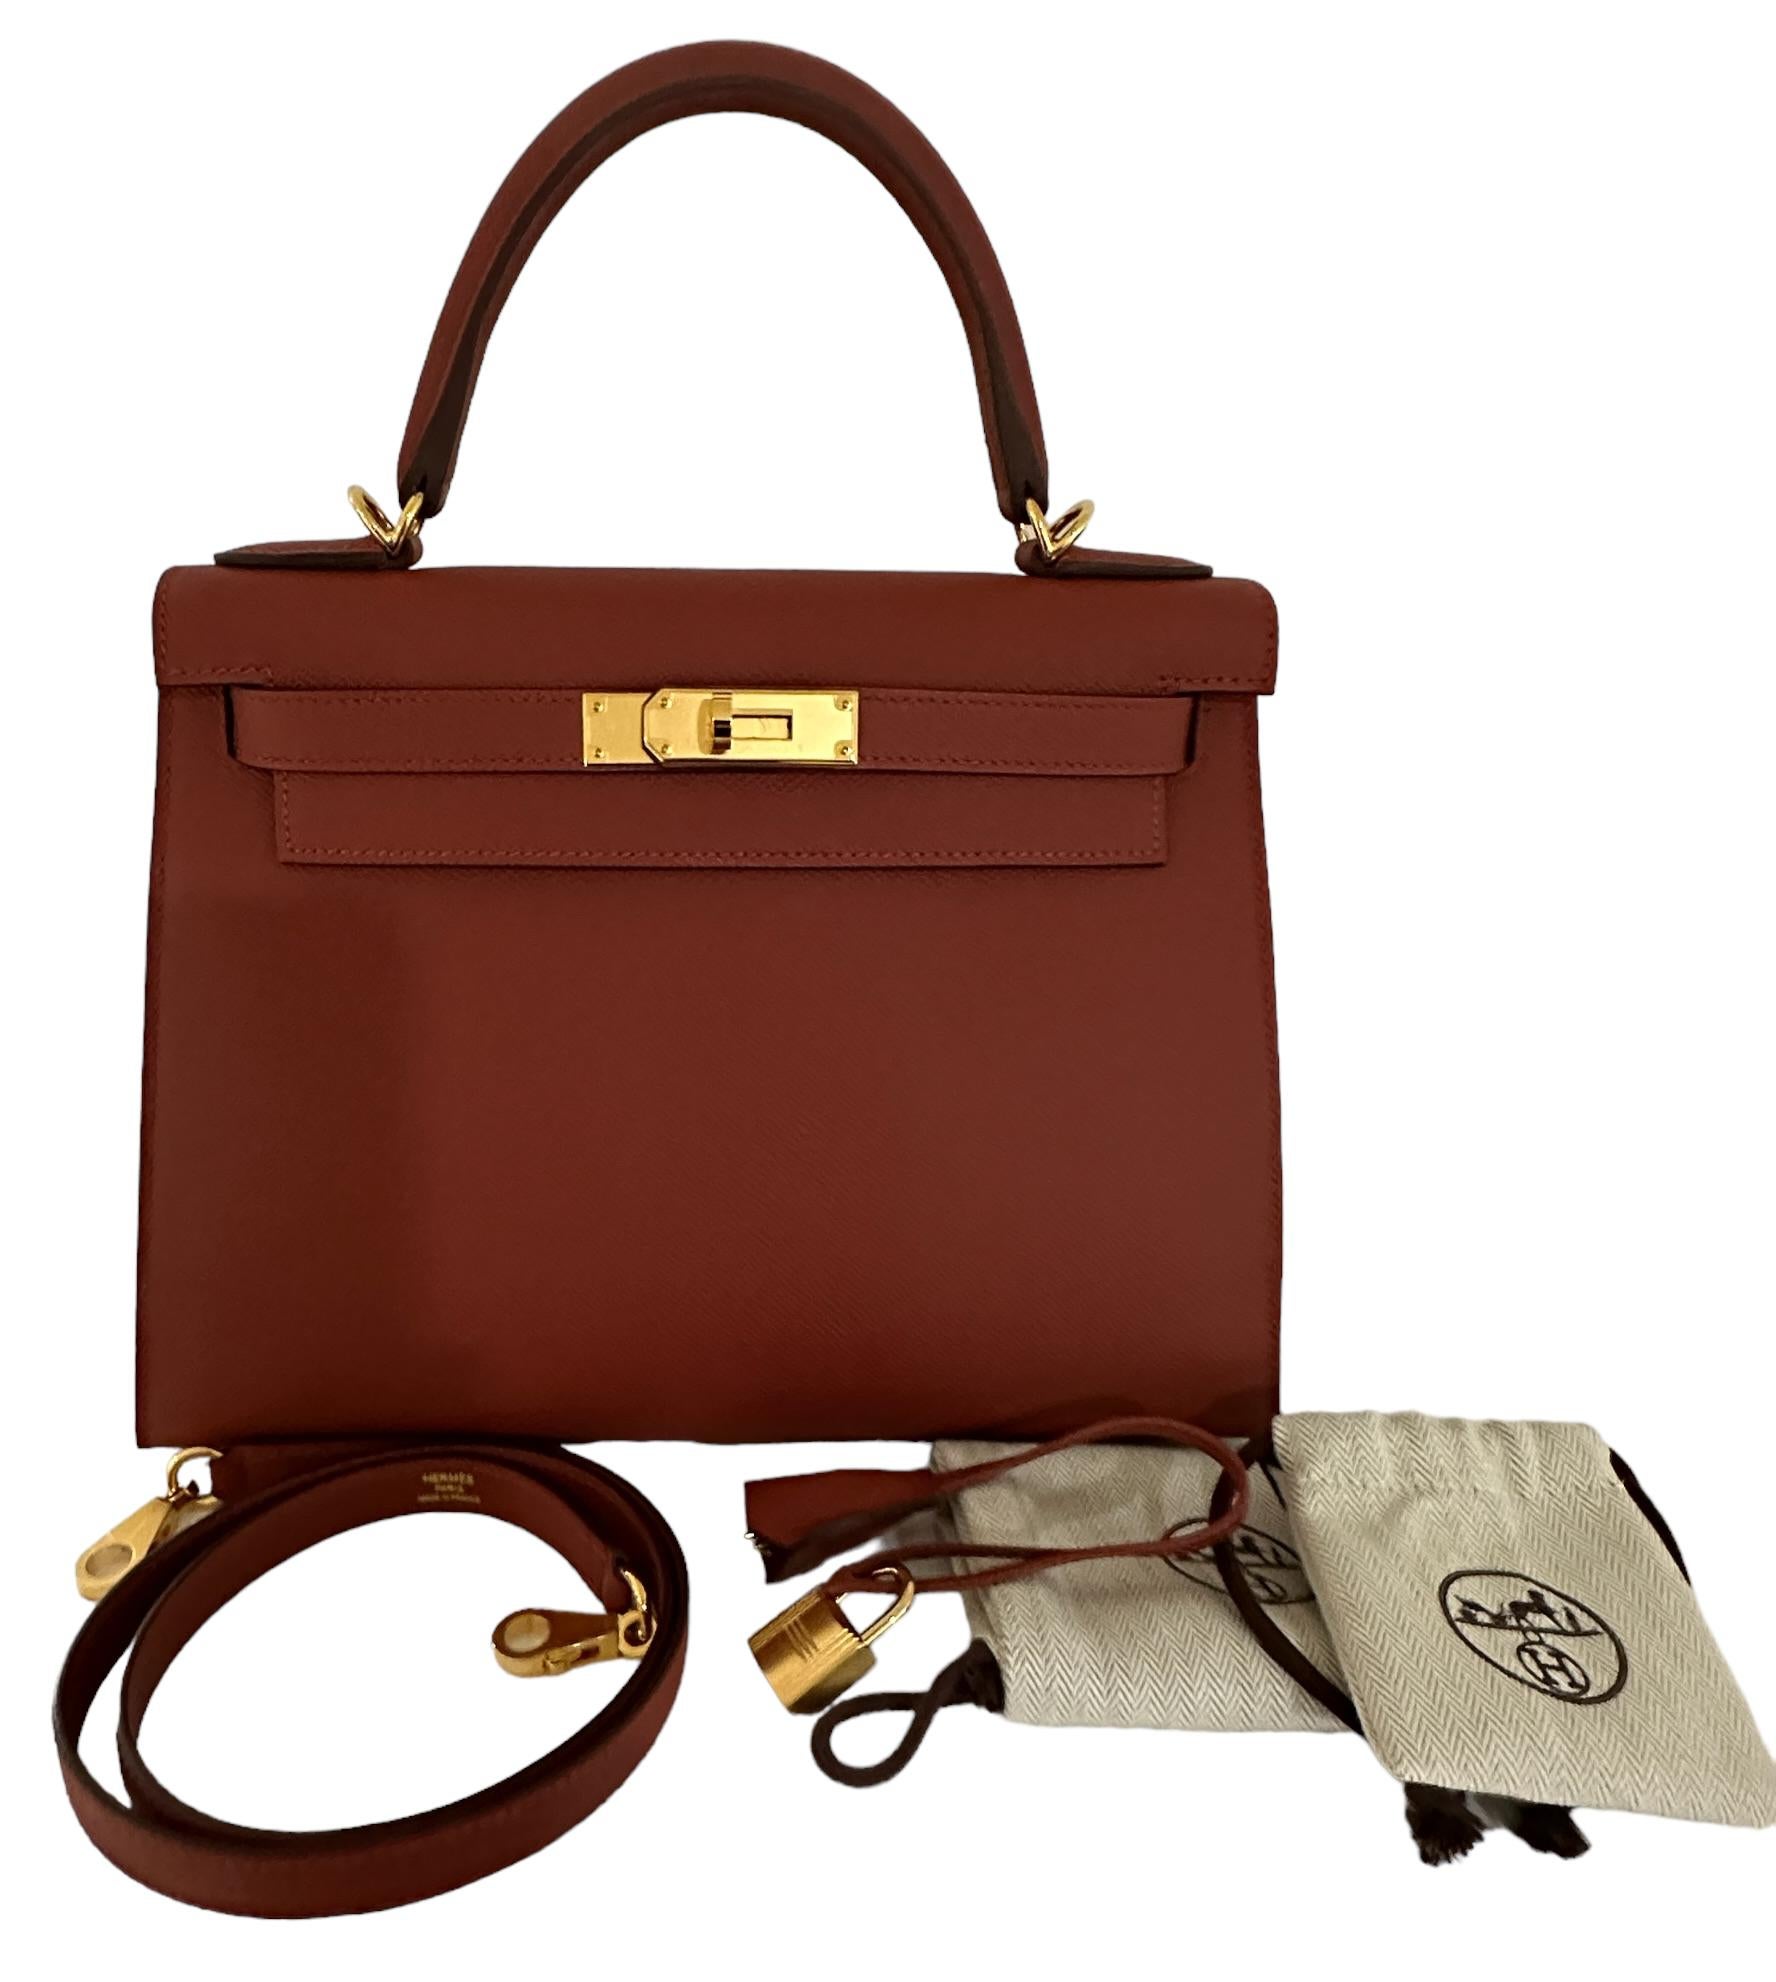 This Kelly Sellier, in the Sellier style, is in Rouge Venetian Epsom Leather with Gold hardware
Tonal stitching, front flap, two straps with center toggle closure, clochette with lock and two keys, and double rolled handles.

A must have for the